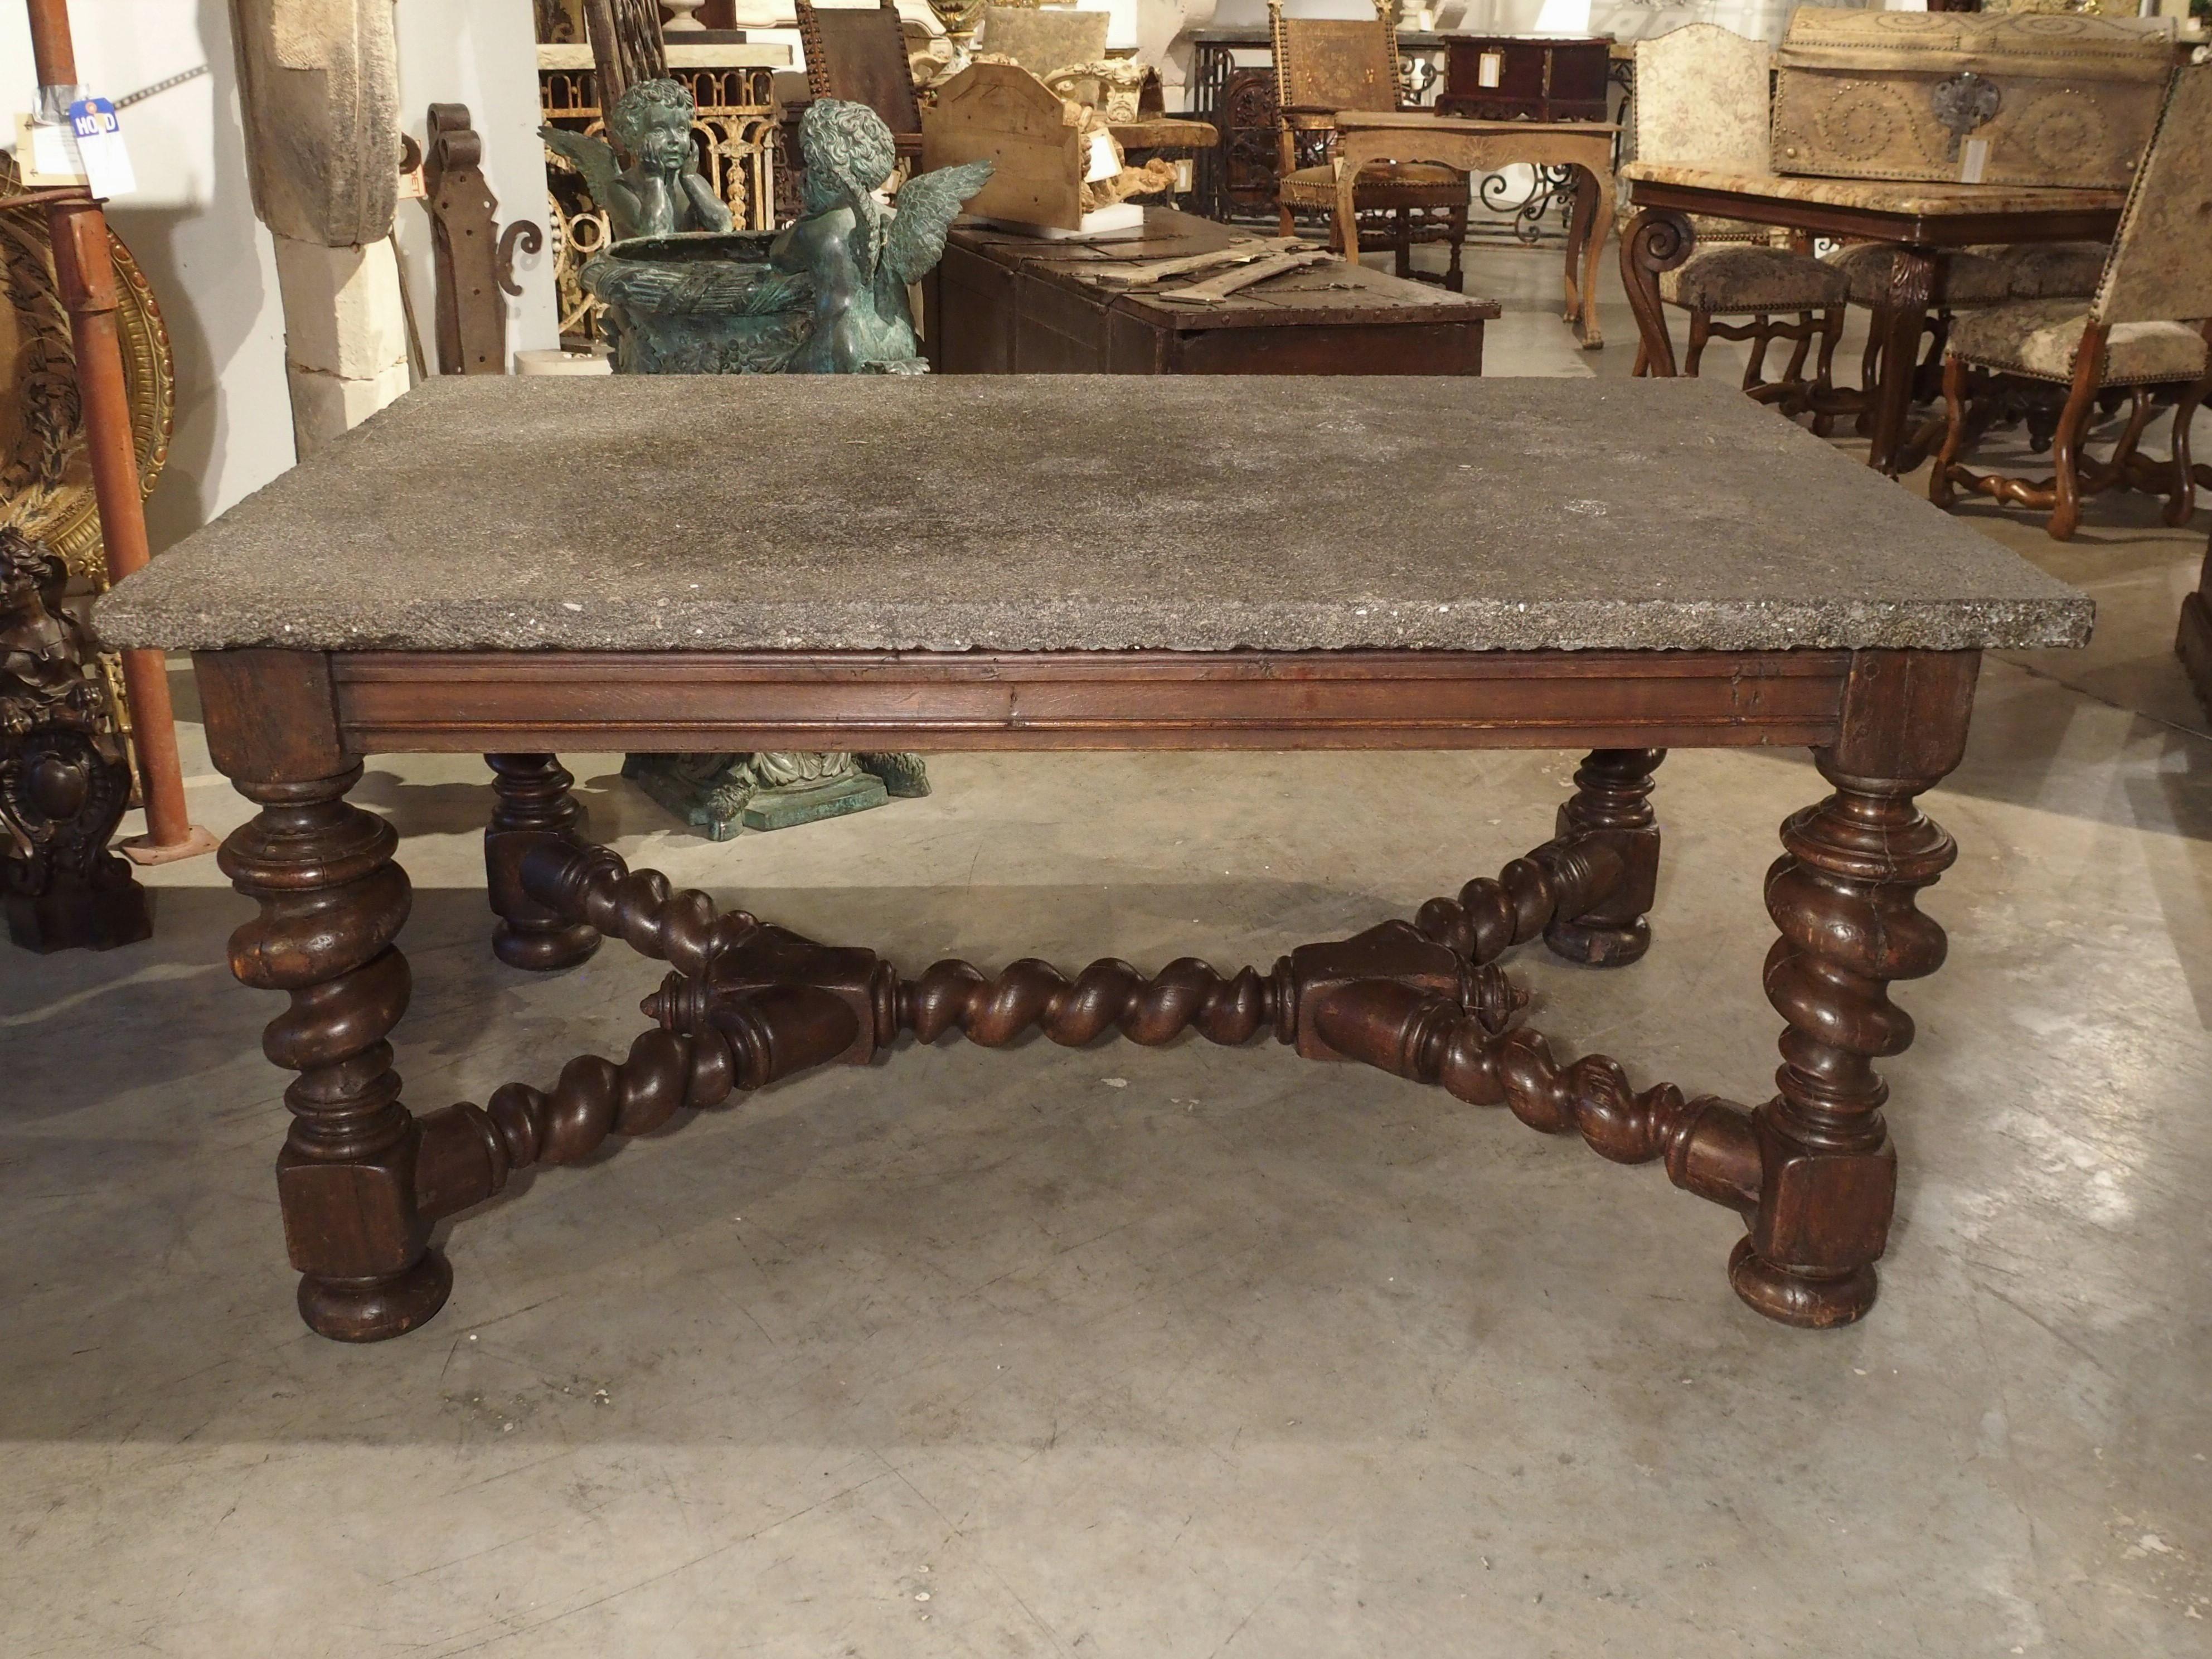 Hand-carved in France, this impressive oak table was produced in circa 1850. The fantastic table has large turned legs with a stretcher and is topped with a 1 ½ inch thick Belgian bluestone top.

The table apron is carved on all four sides, with a